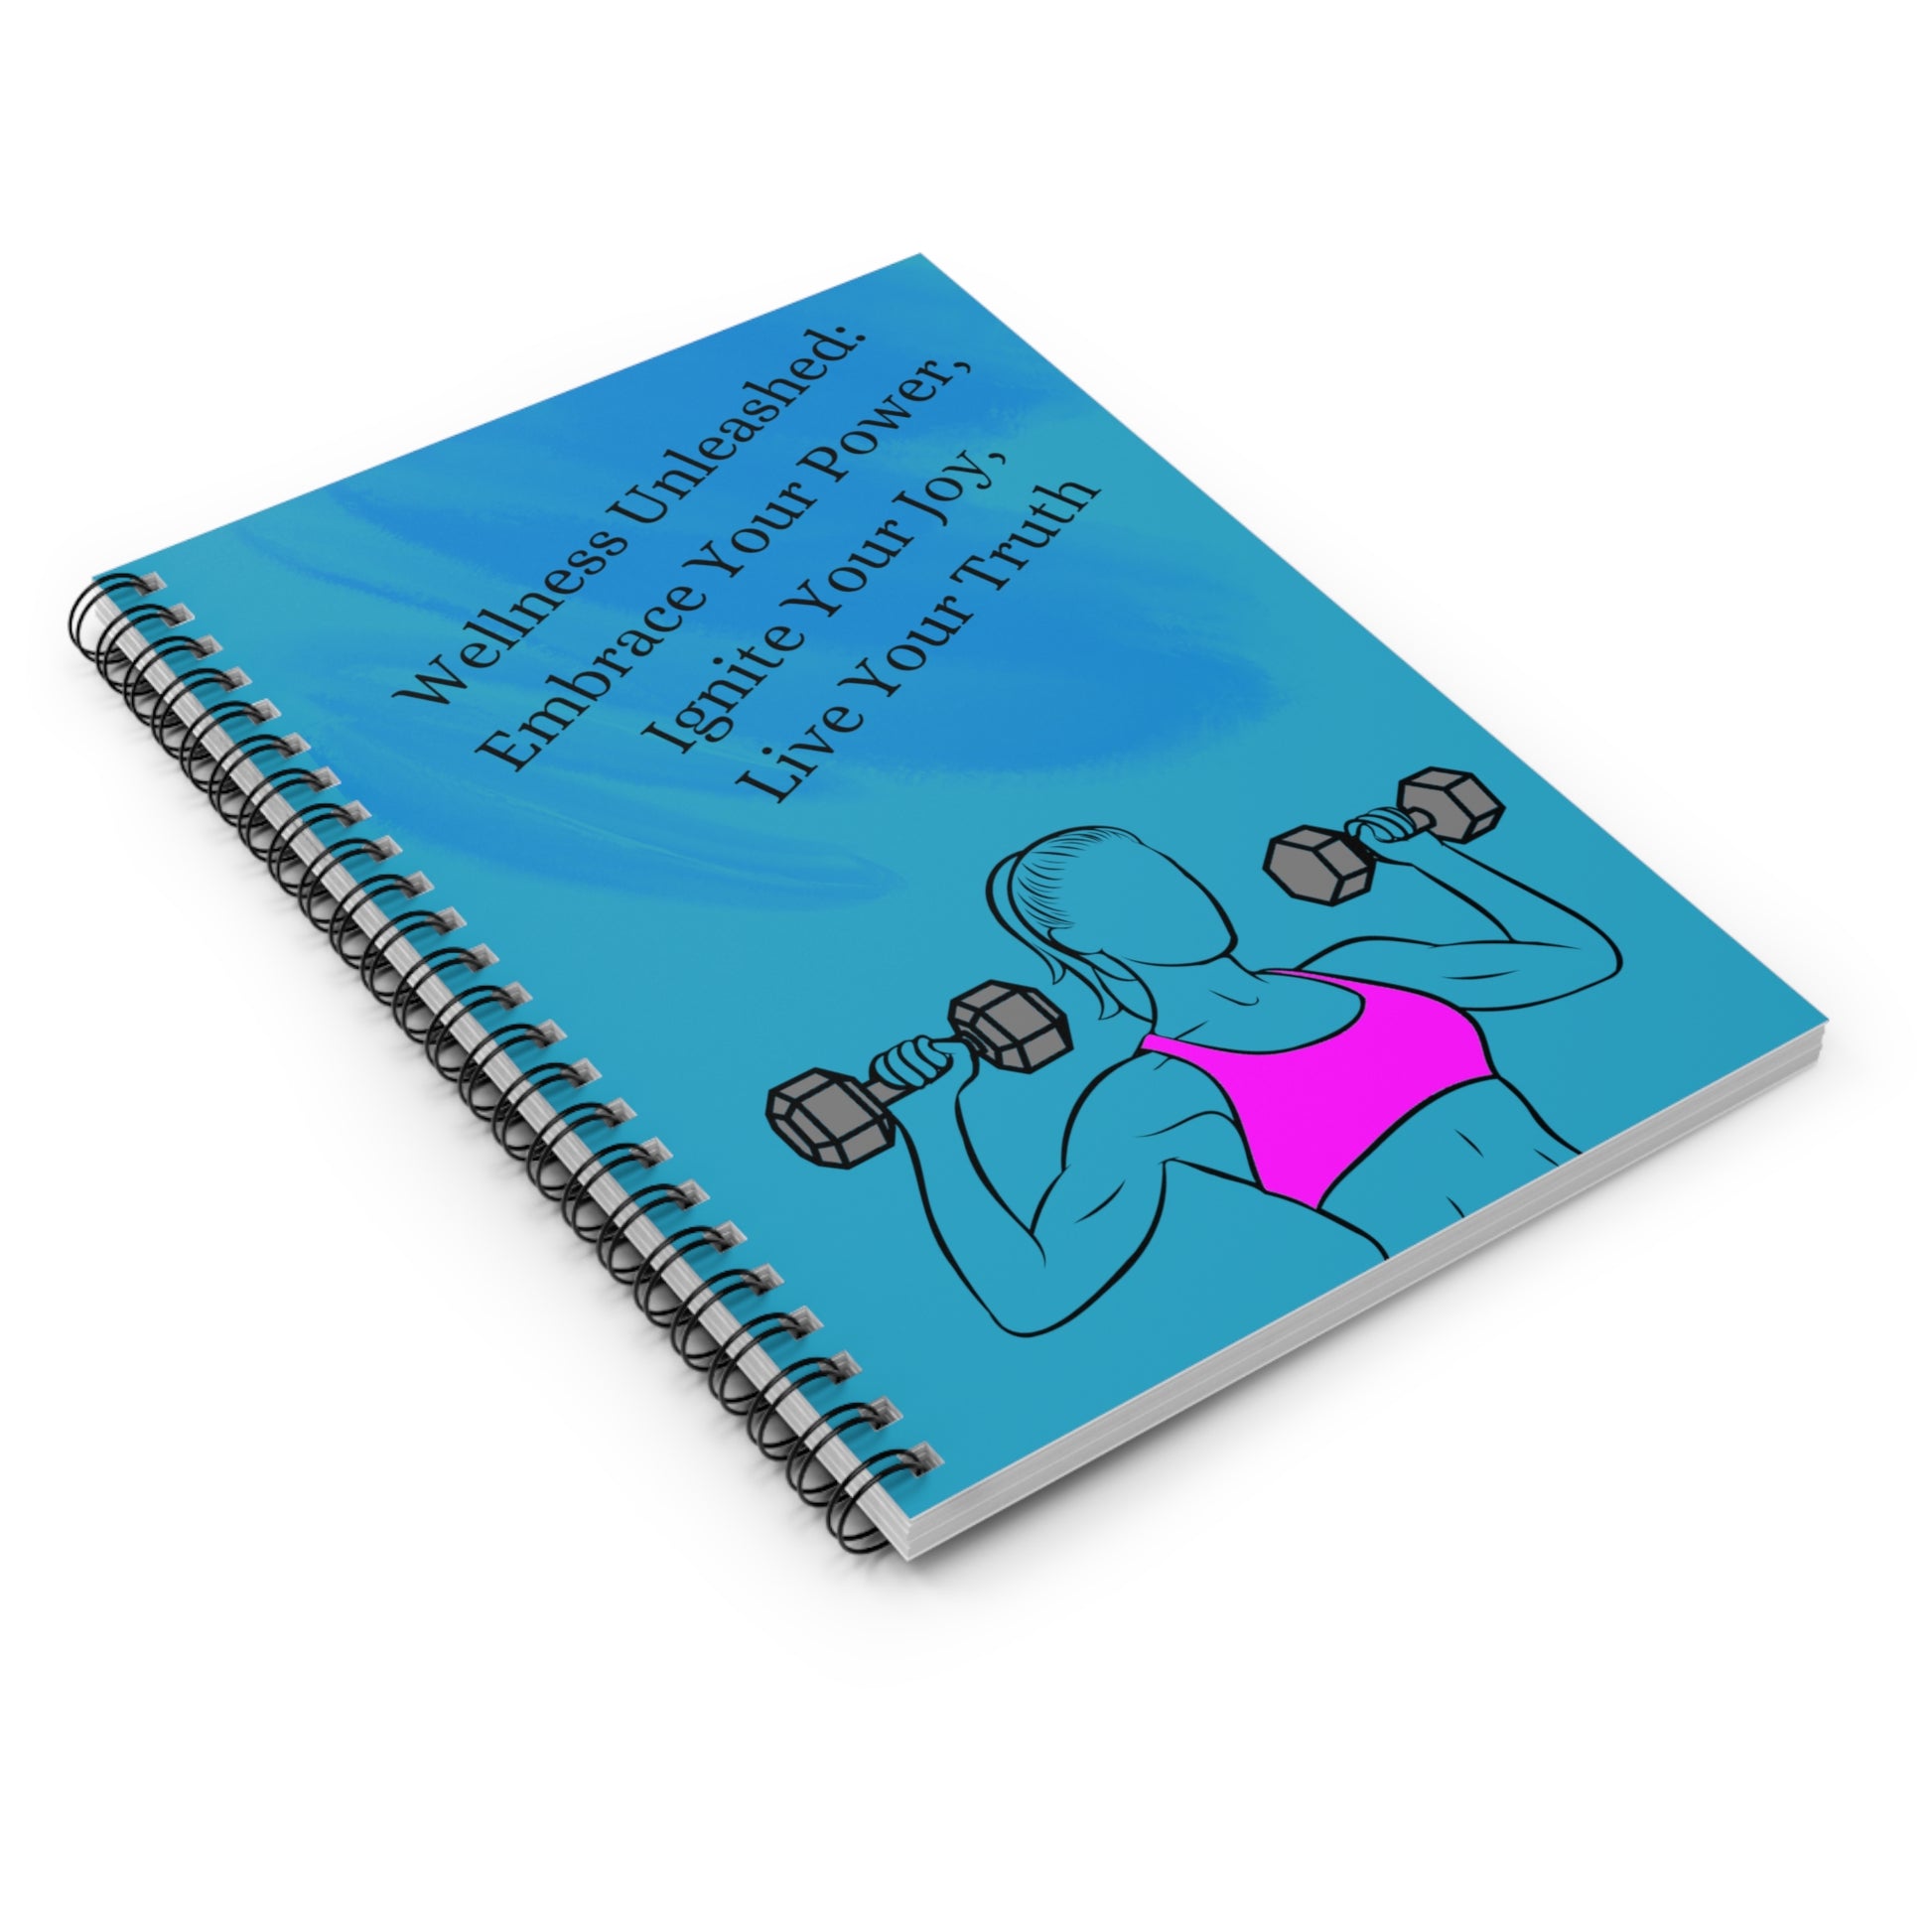 Embrace Your Power: Spiral Notebook - Log Books - Journals - Diaries - and More Custom Printed by TheGlassyLass